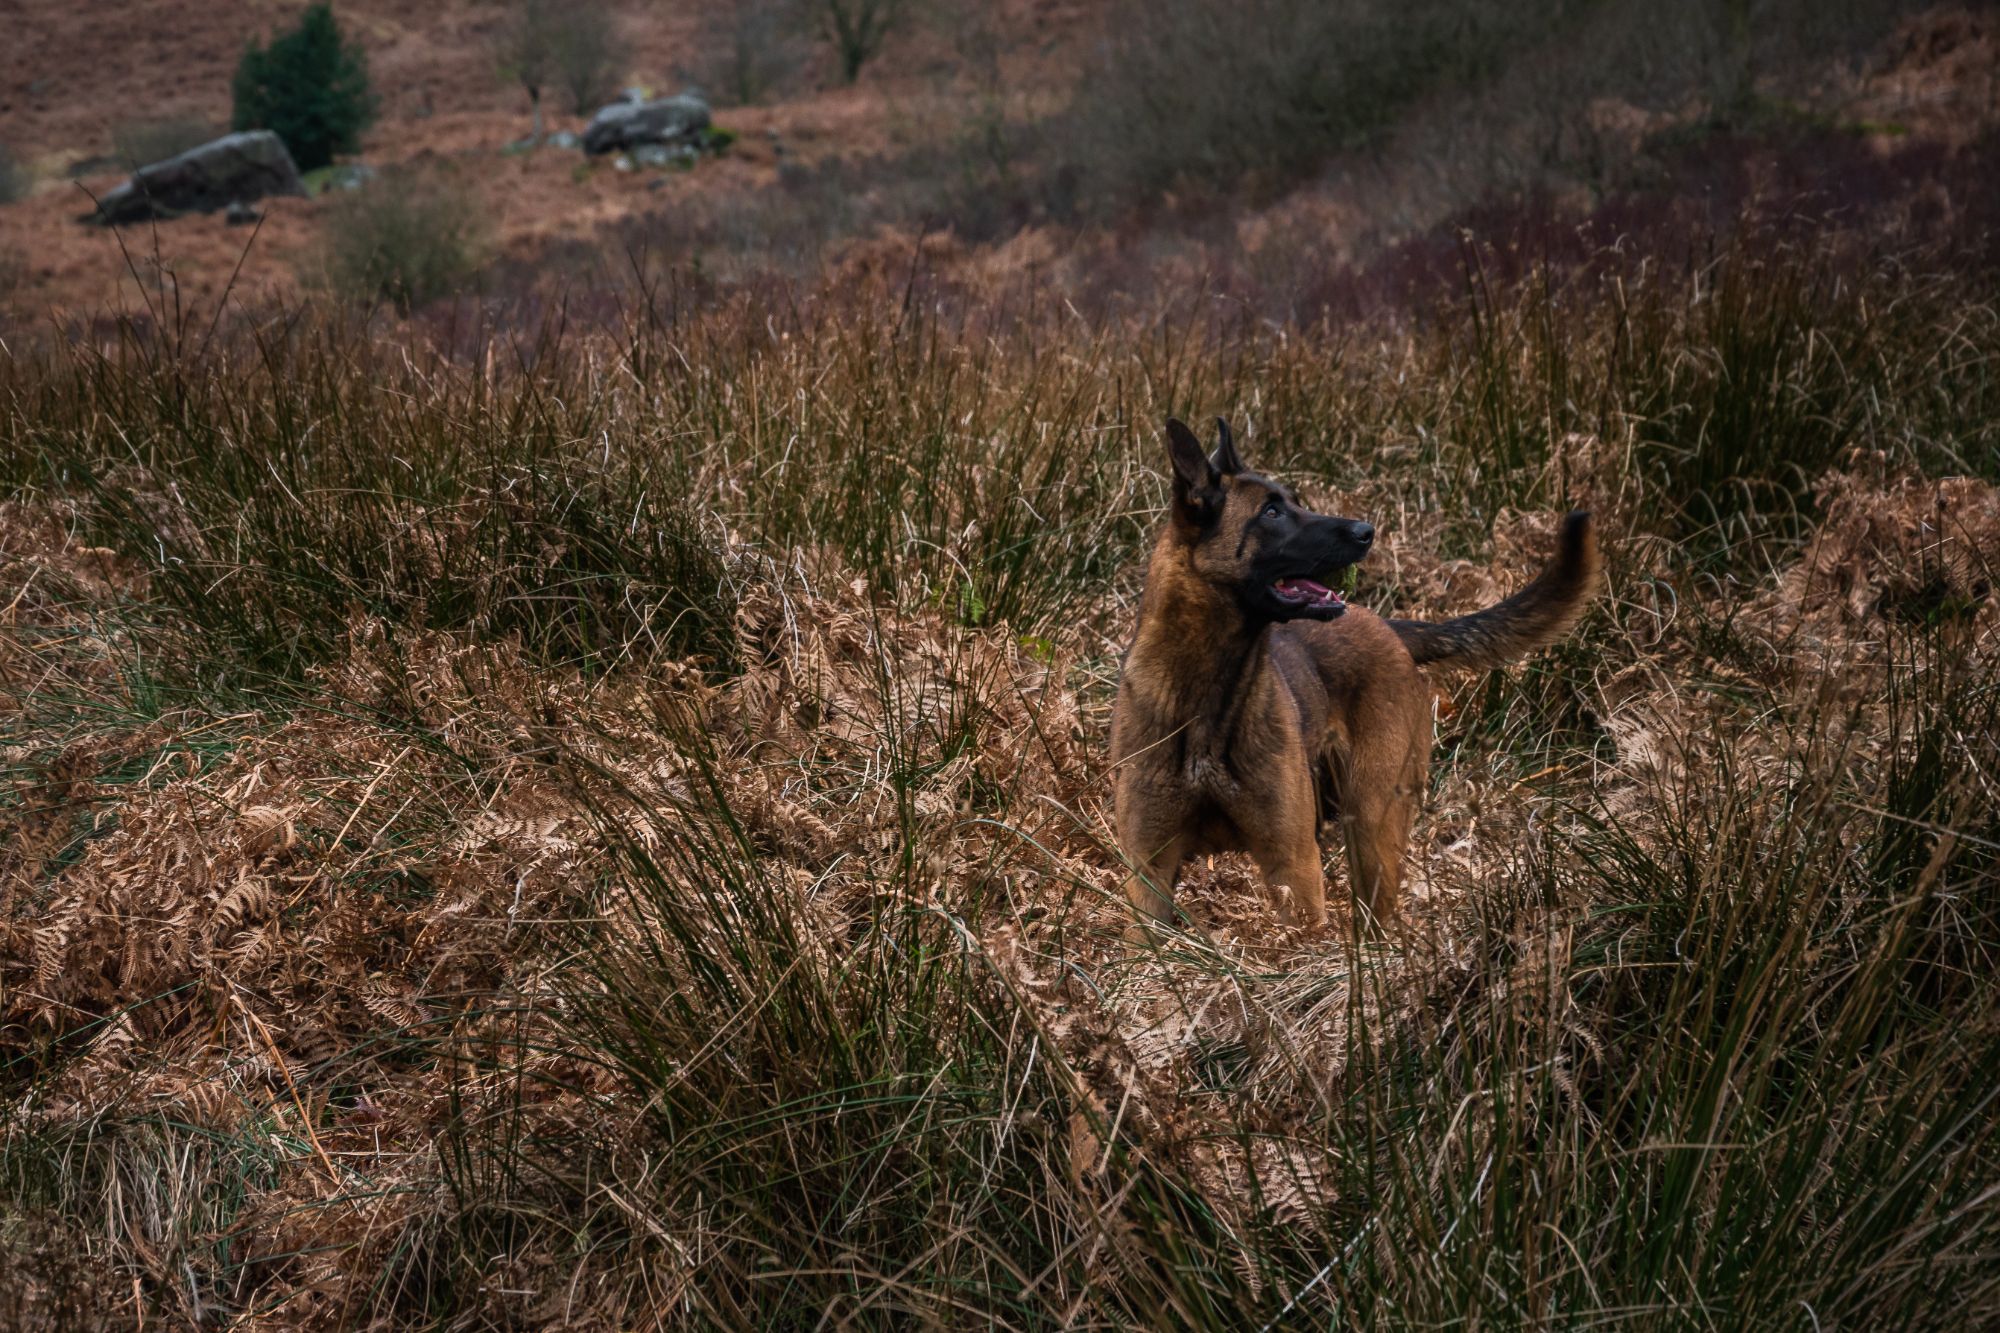 A dutch herder is photographed in her favourite location - playing amongst the grasses and reeds by a river. It's autumn time so she blends in with the location really well.